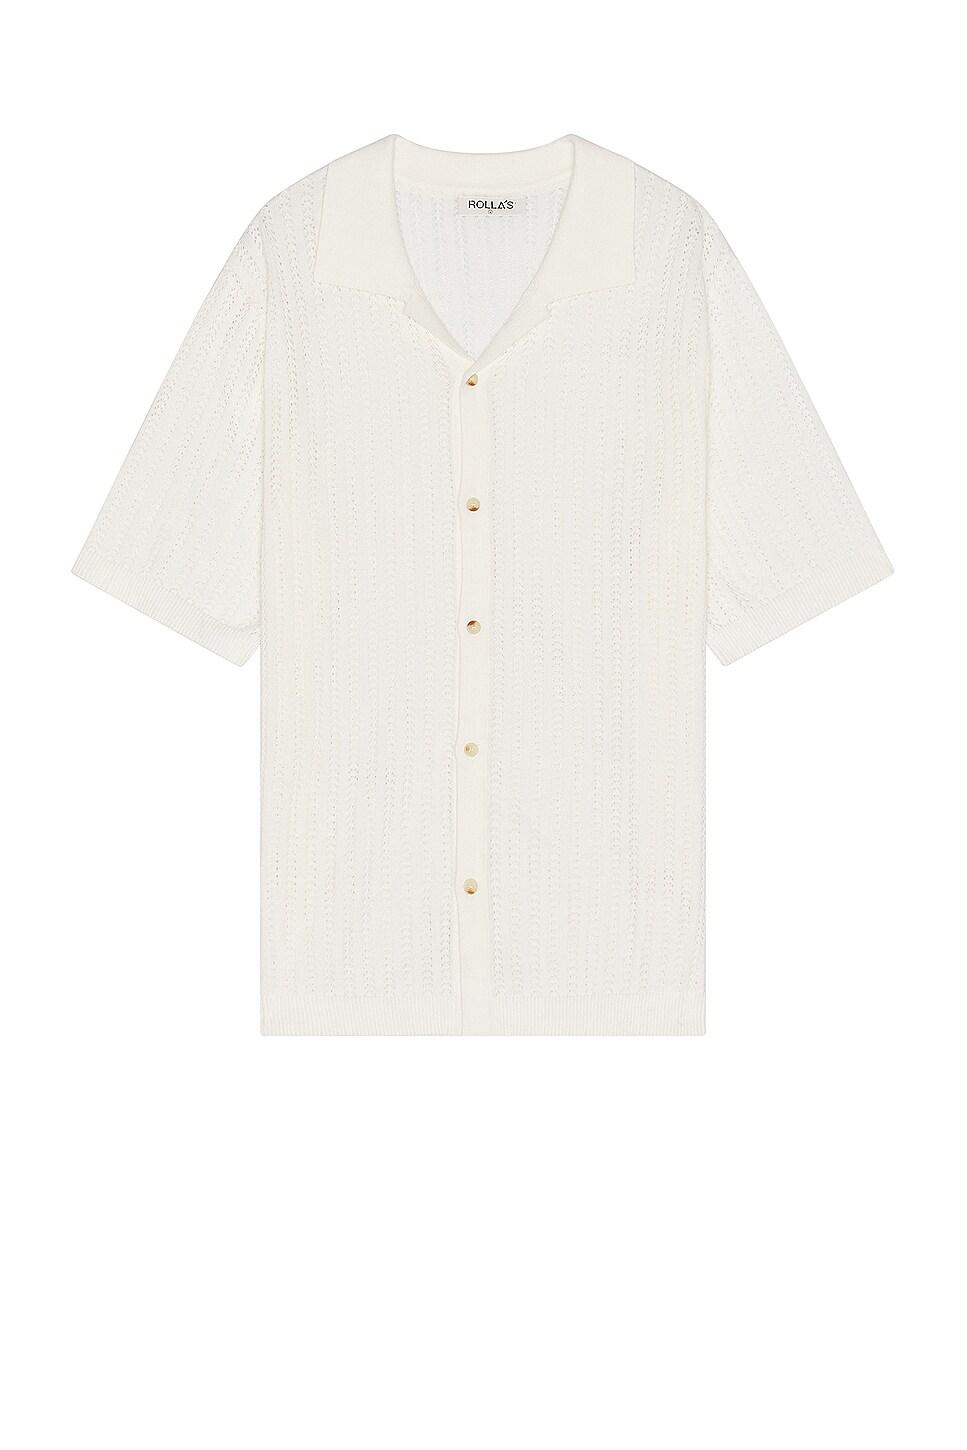 Rolla's Bowler Knit Shirt in White for Men | Lyst